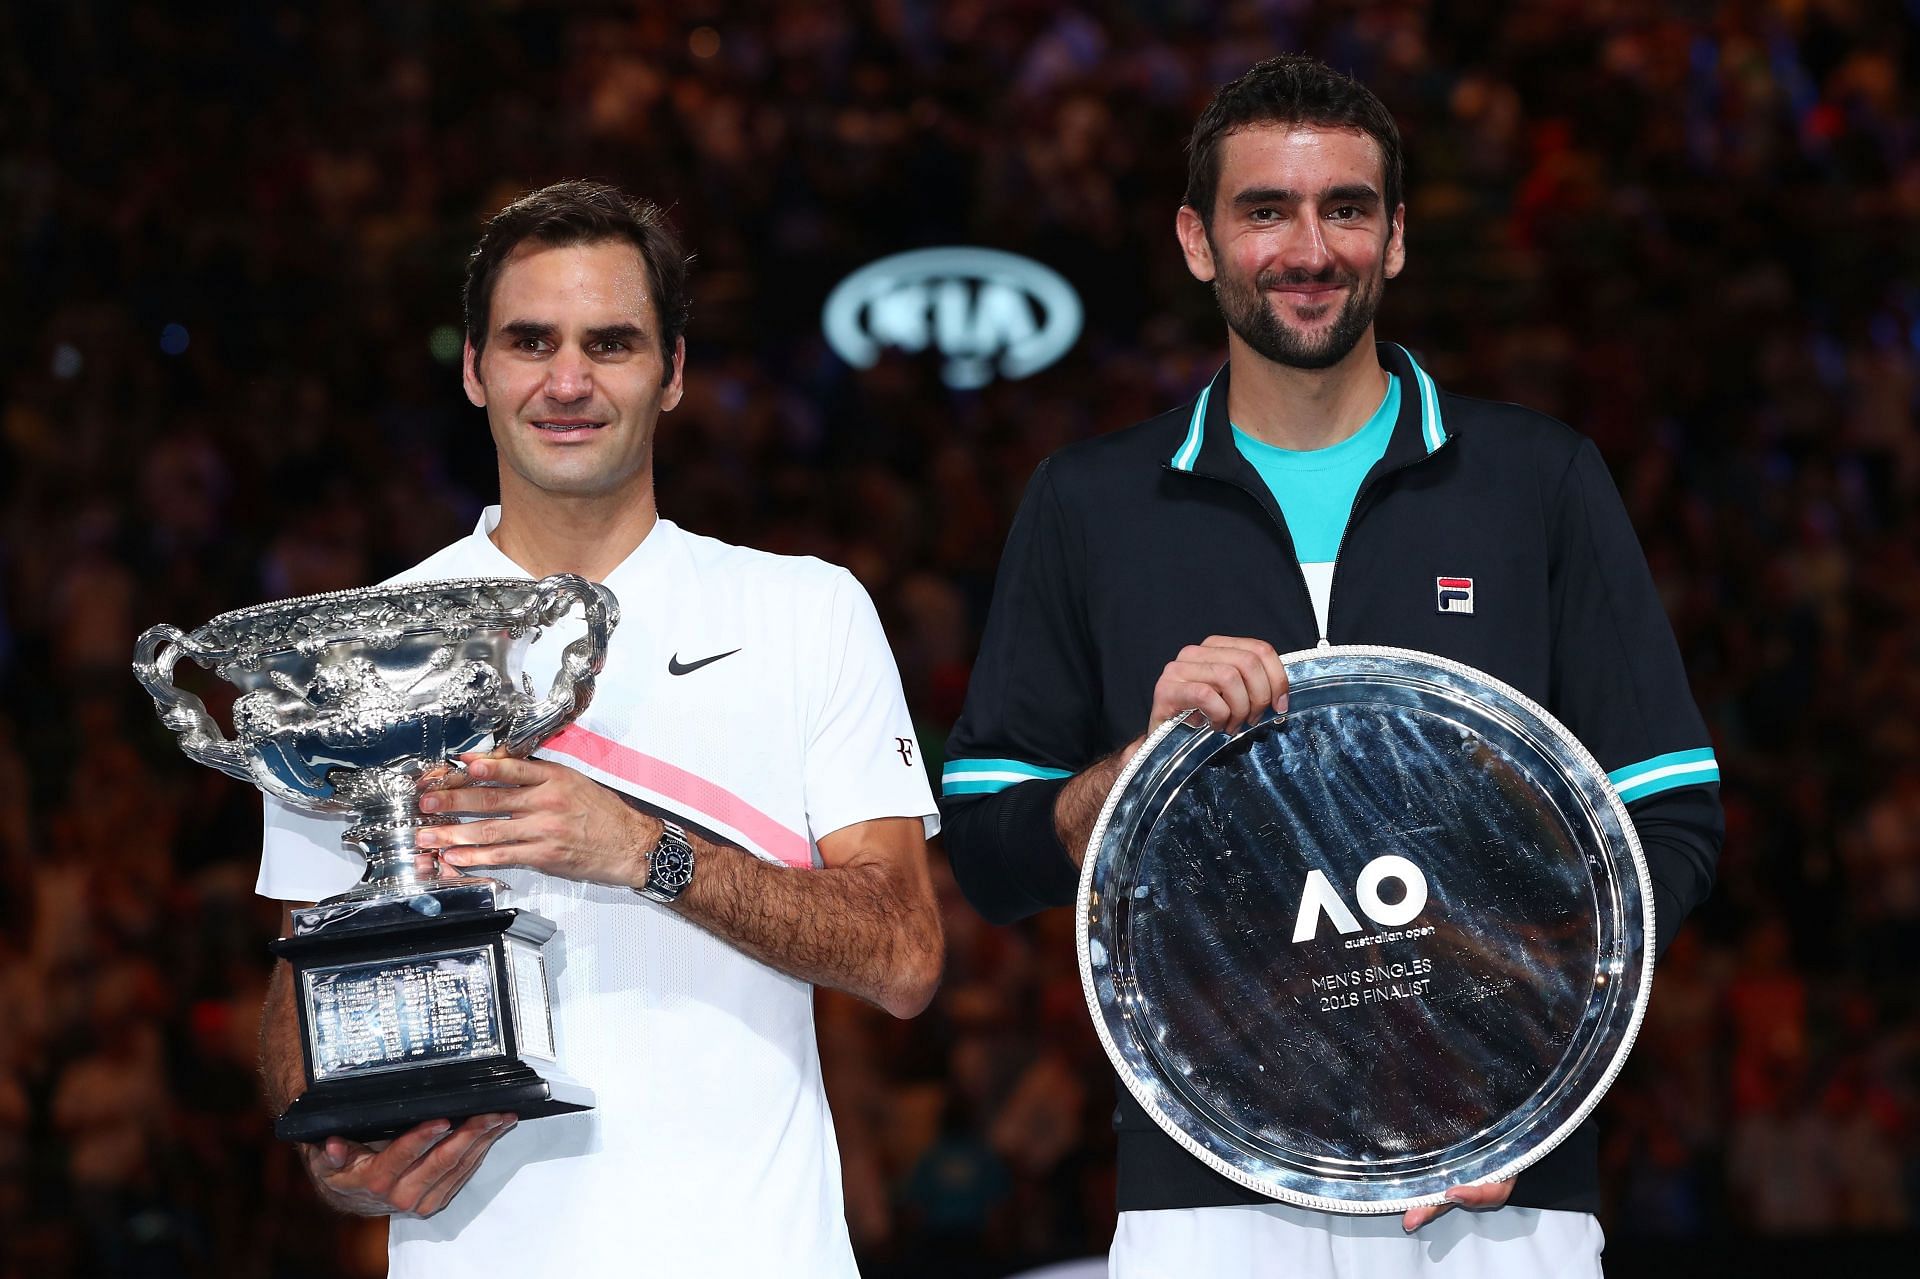 Roger Federer and Marin Cilic contested the 2018 Australian Open final.